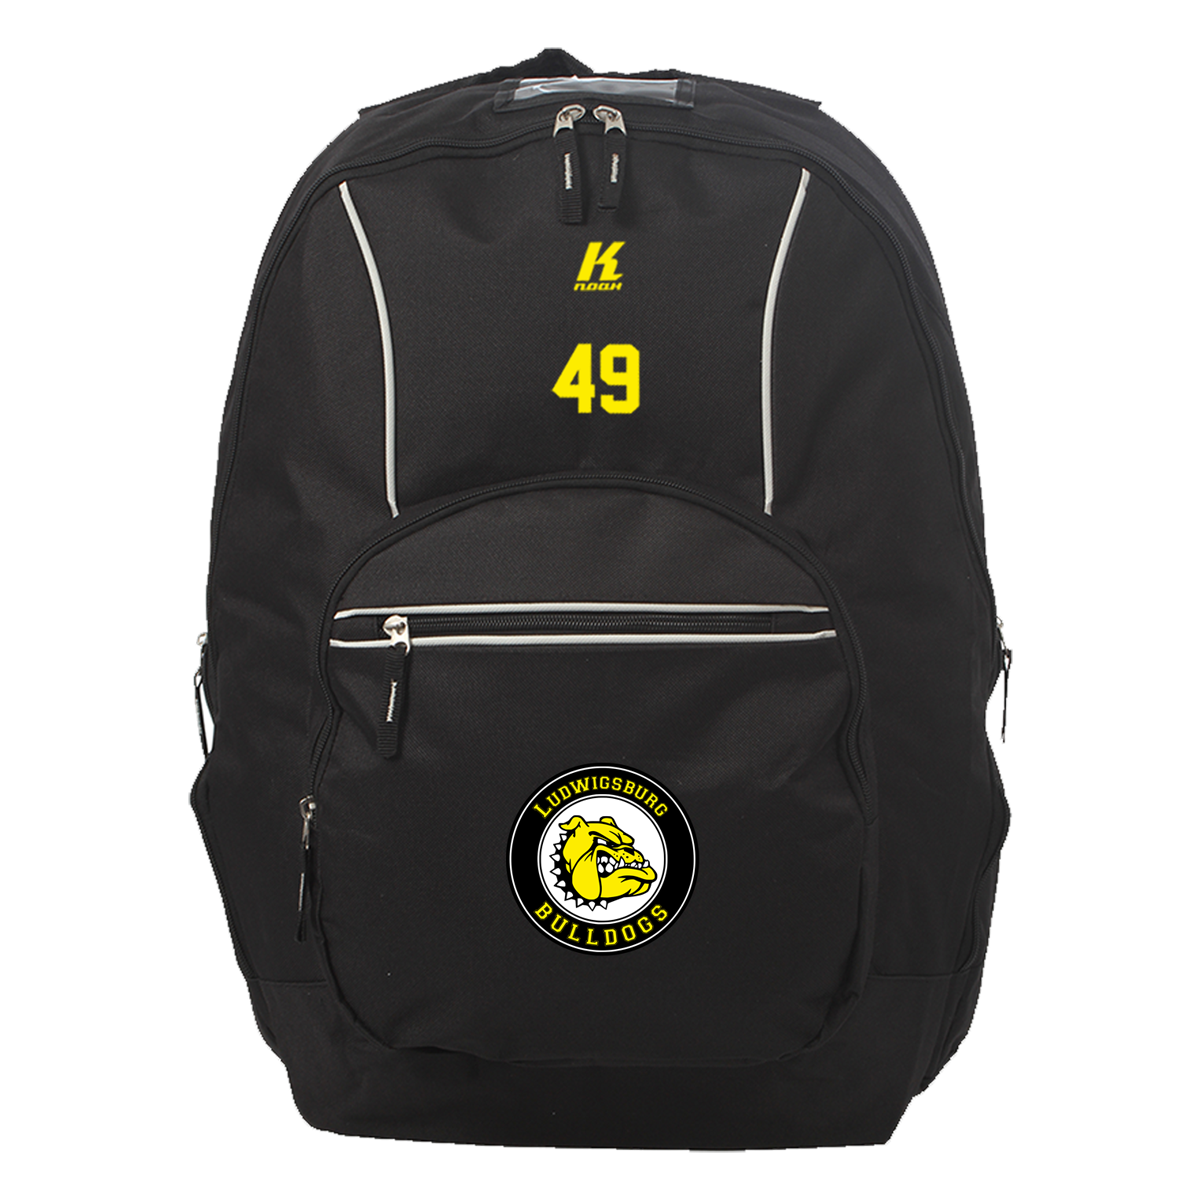 LB-Bulldogs Heritage Backpack with Playernumber or Initials